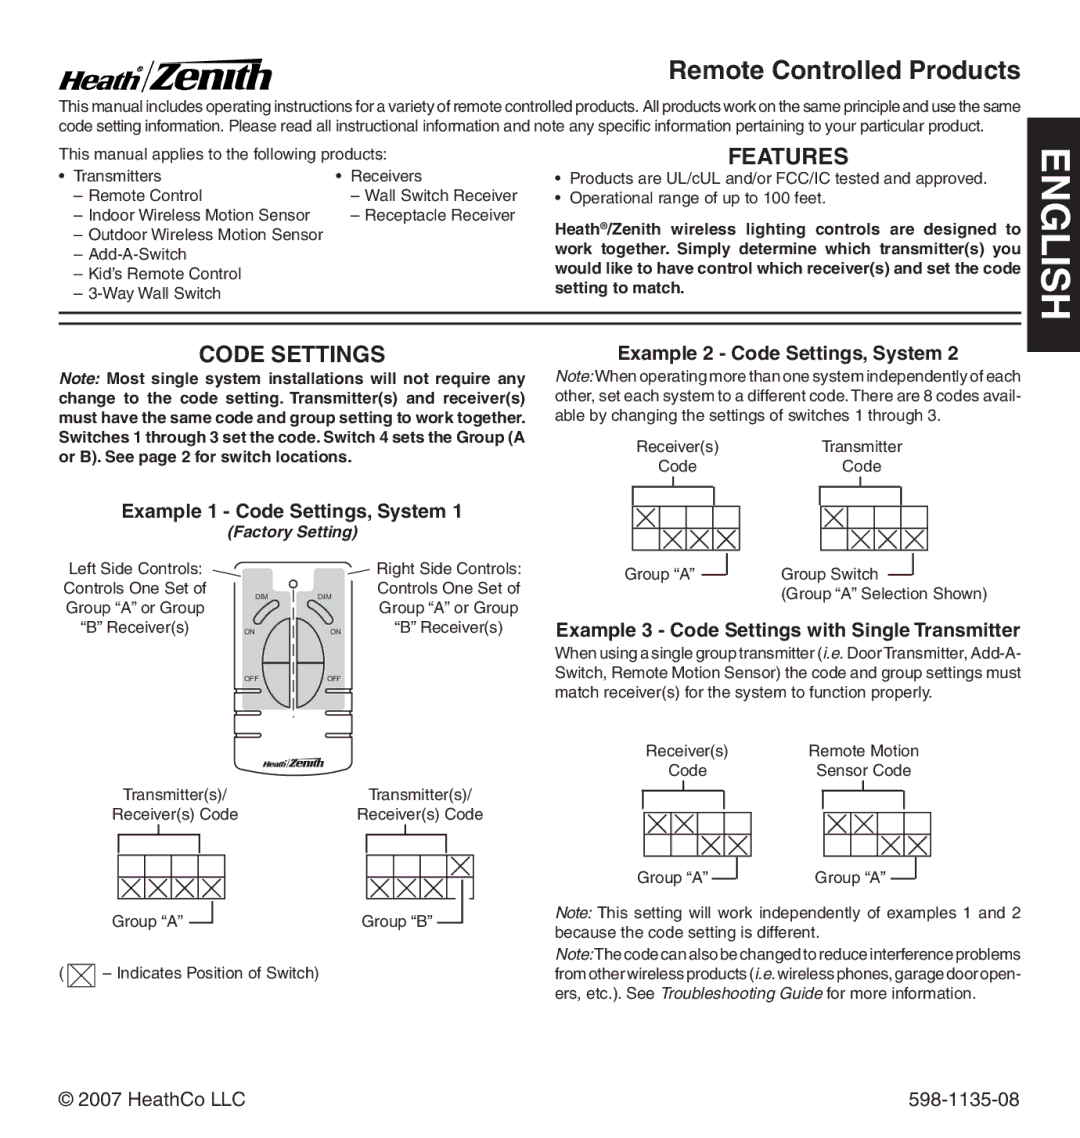 Heath Zenith 598-1135-08 operating instructions Features, Example 2 Code Settings, System 